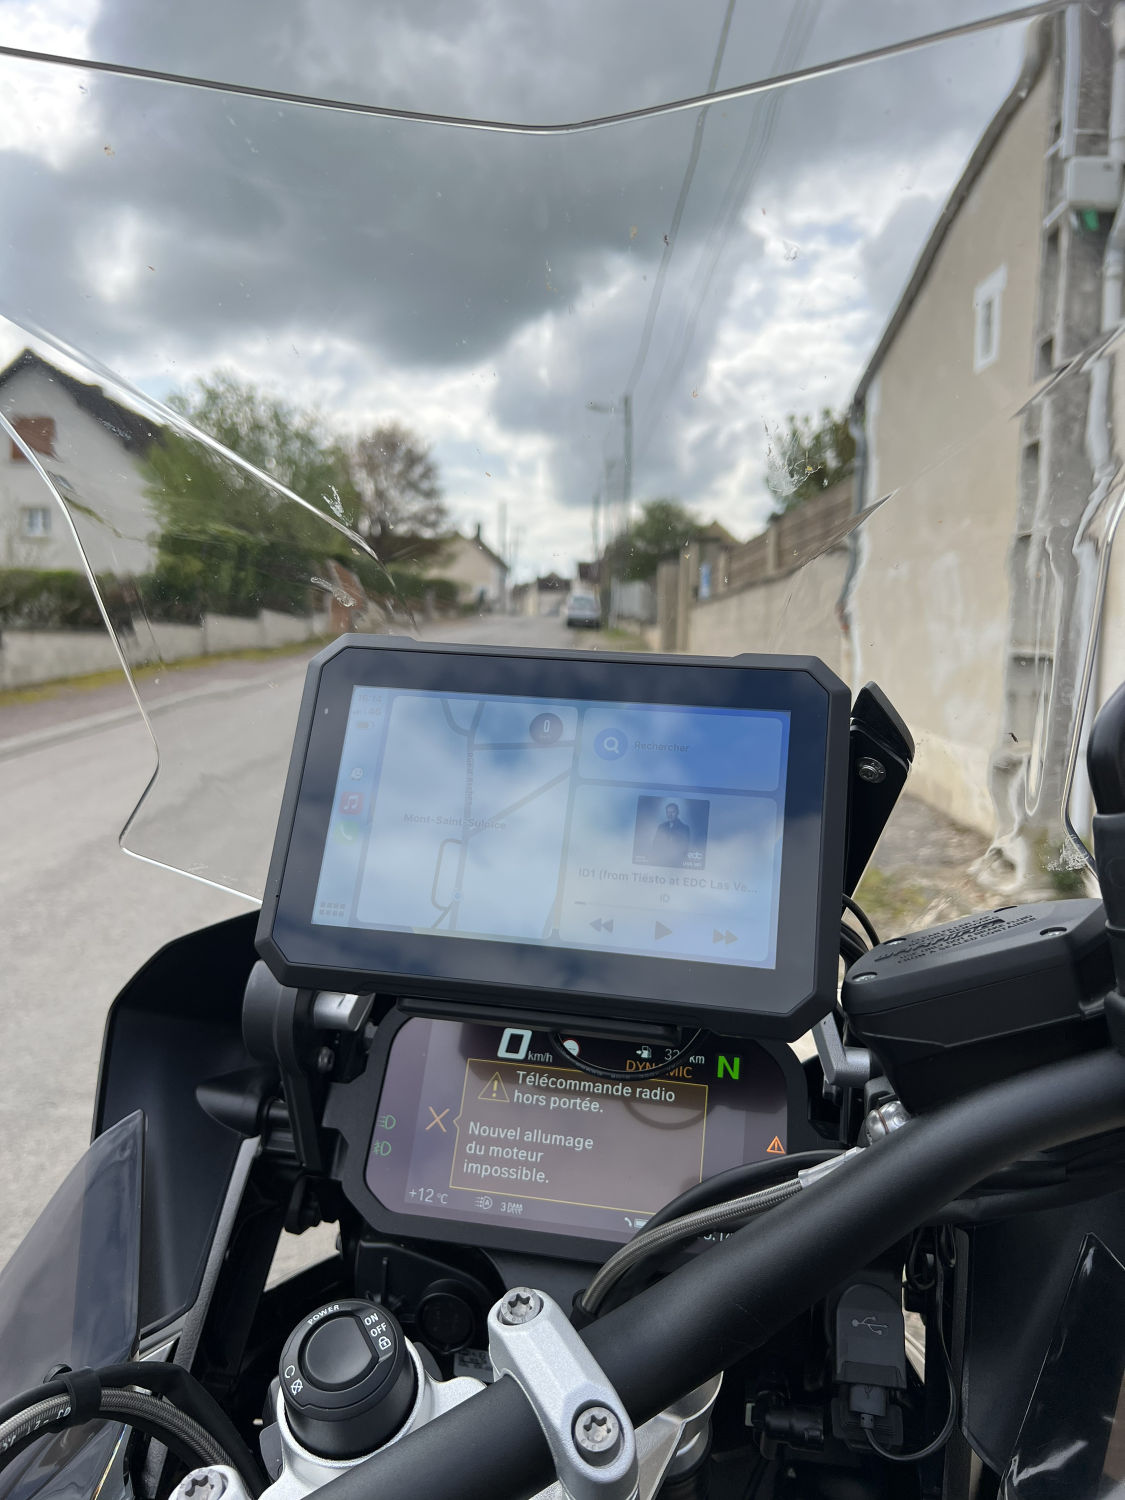 Carplay For Motorcycle